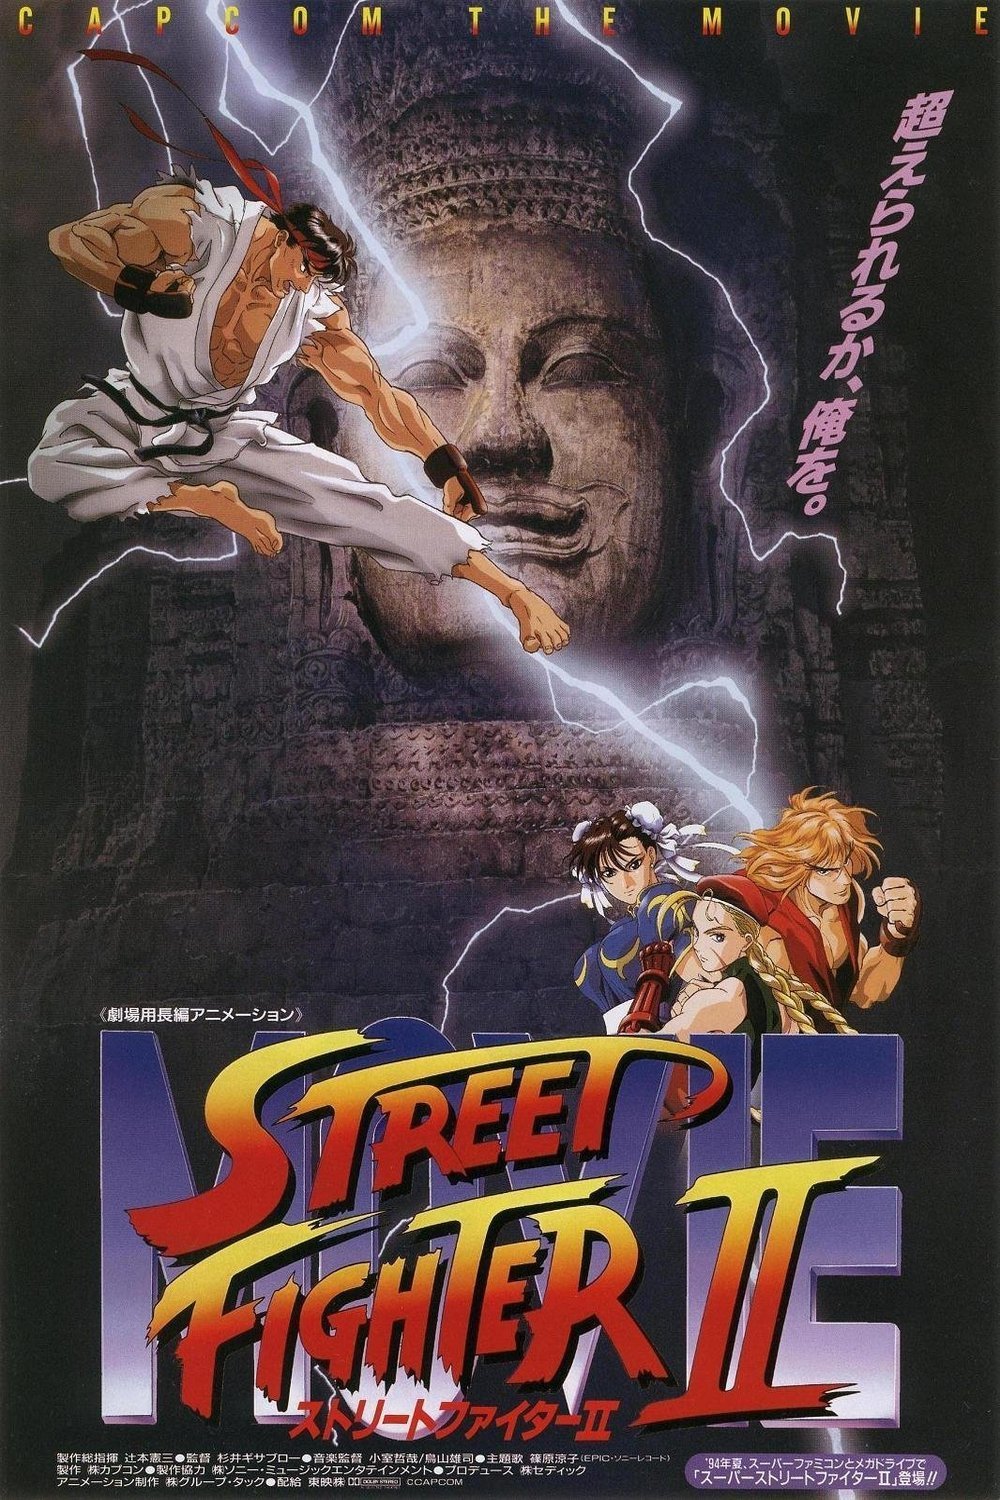 Japanese poster of the movie Street Fighter II: The Animated Movie